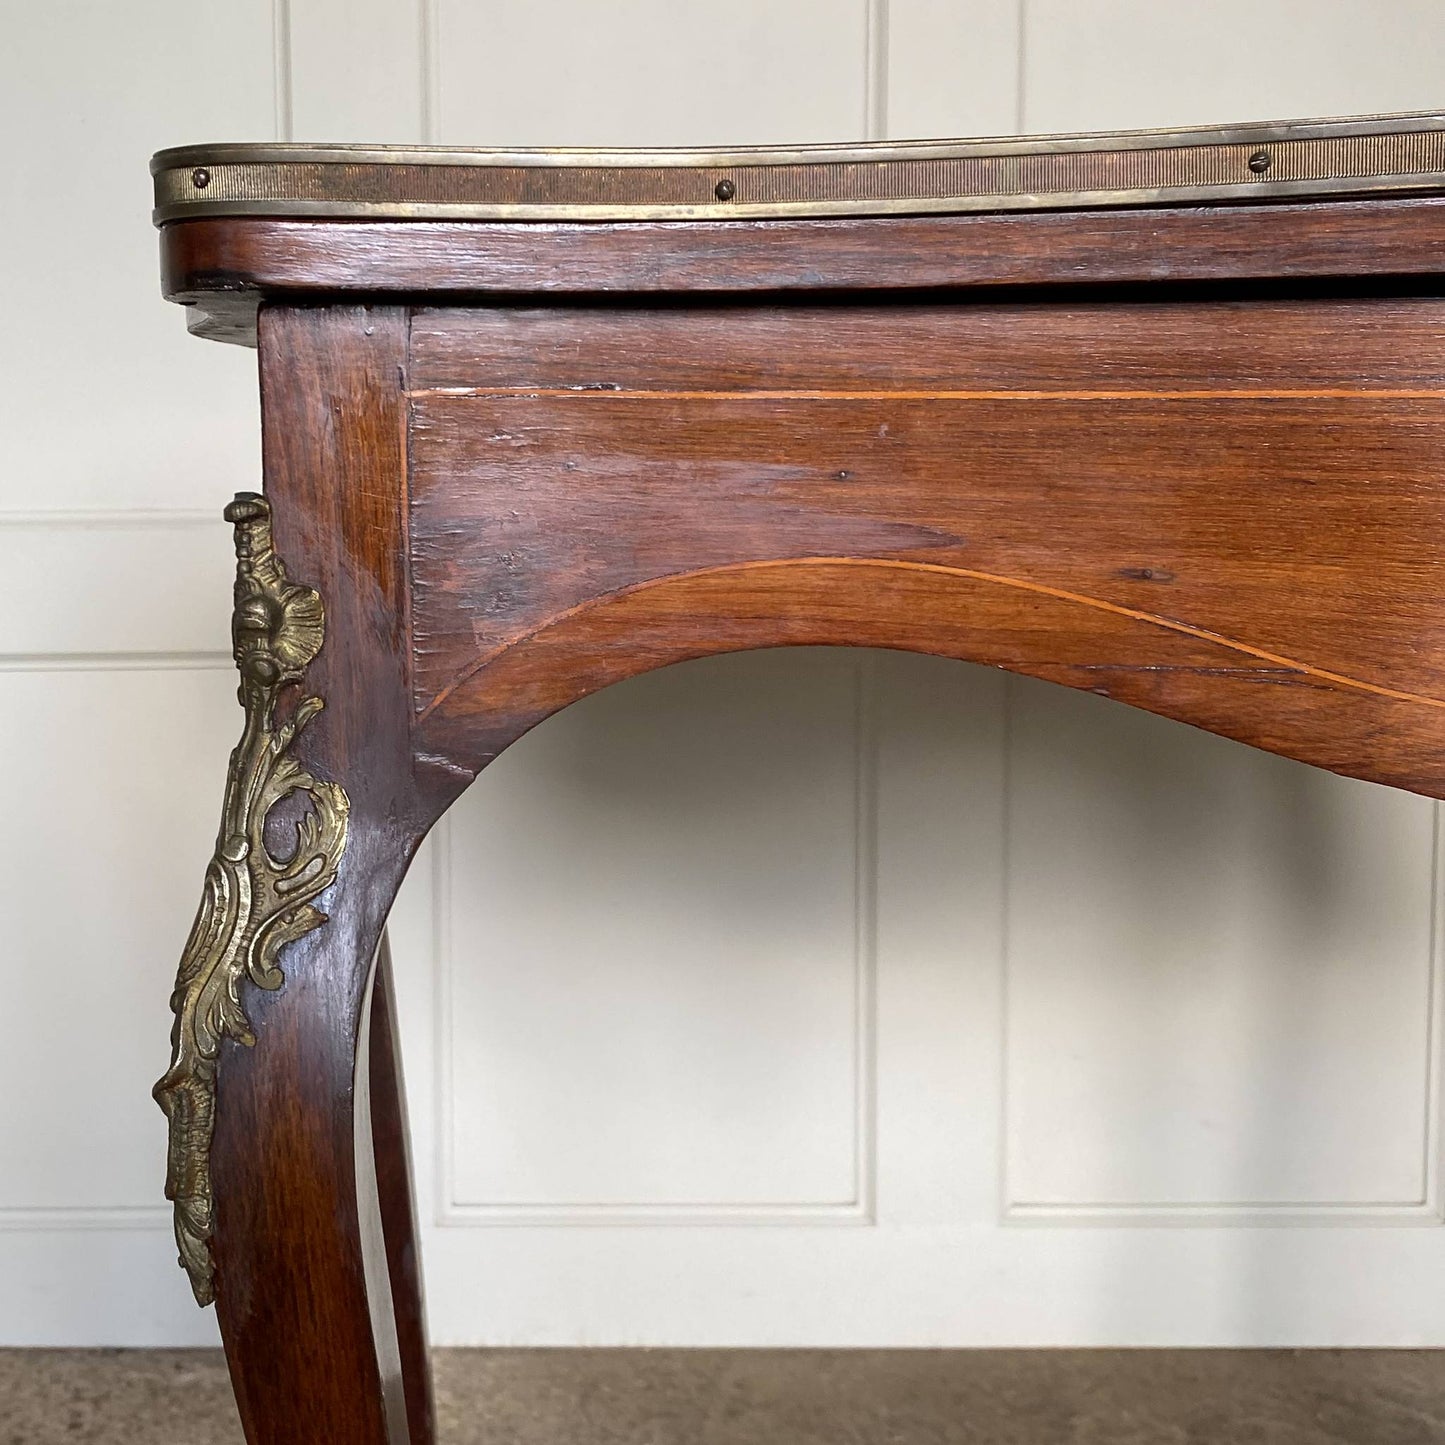 19th Century Walnut and Marquetry Inlaid Serpentine Card Table